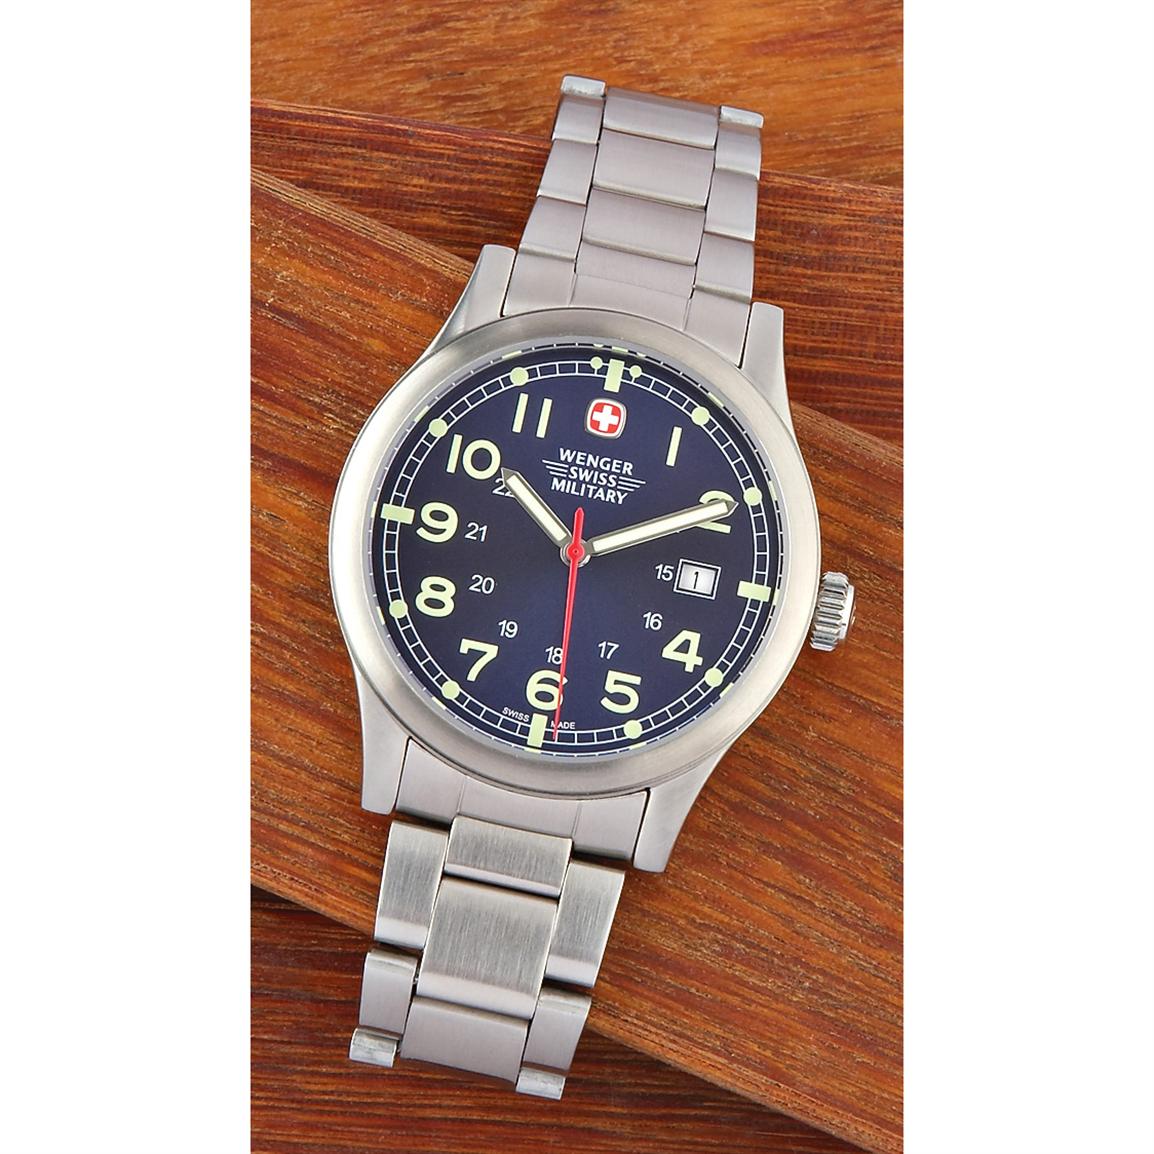 Swiss Army Watch Wenger - Army Military